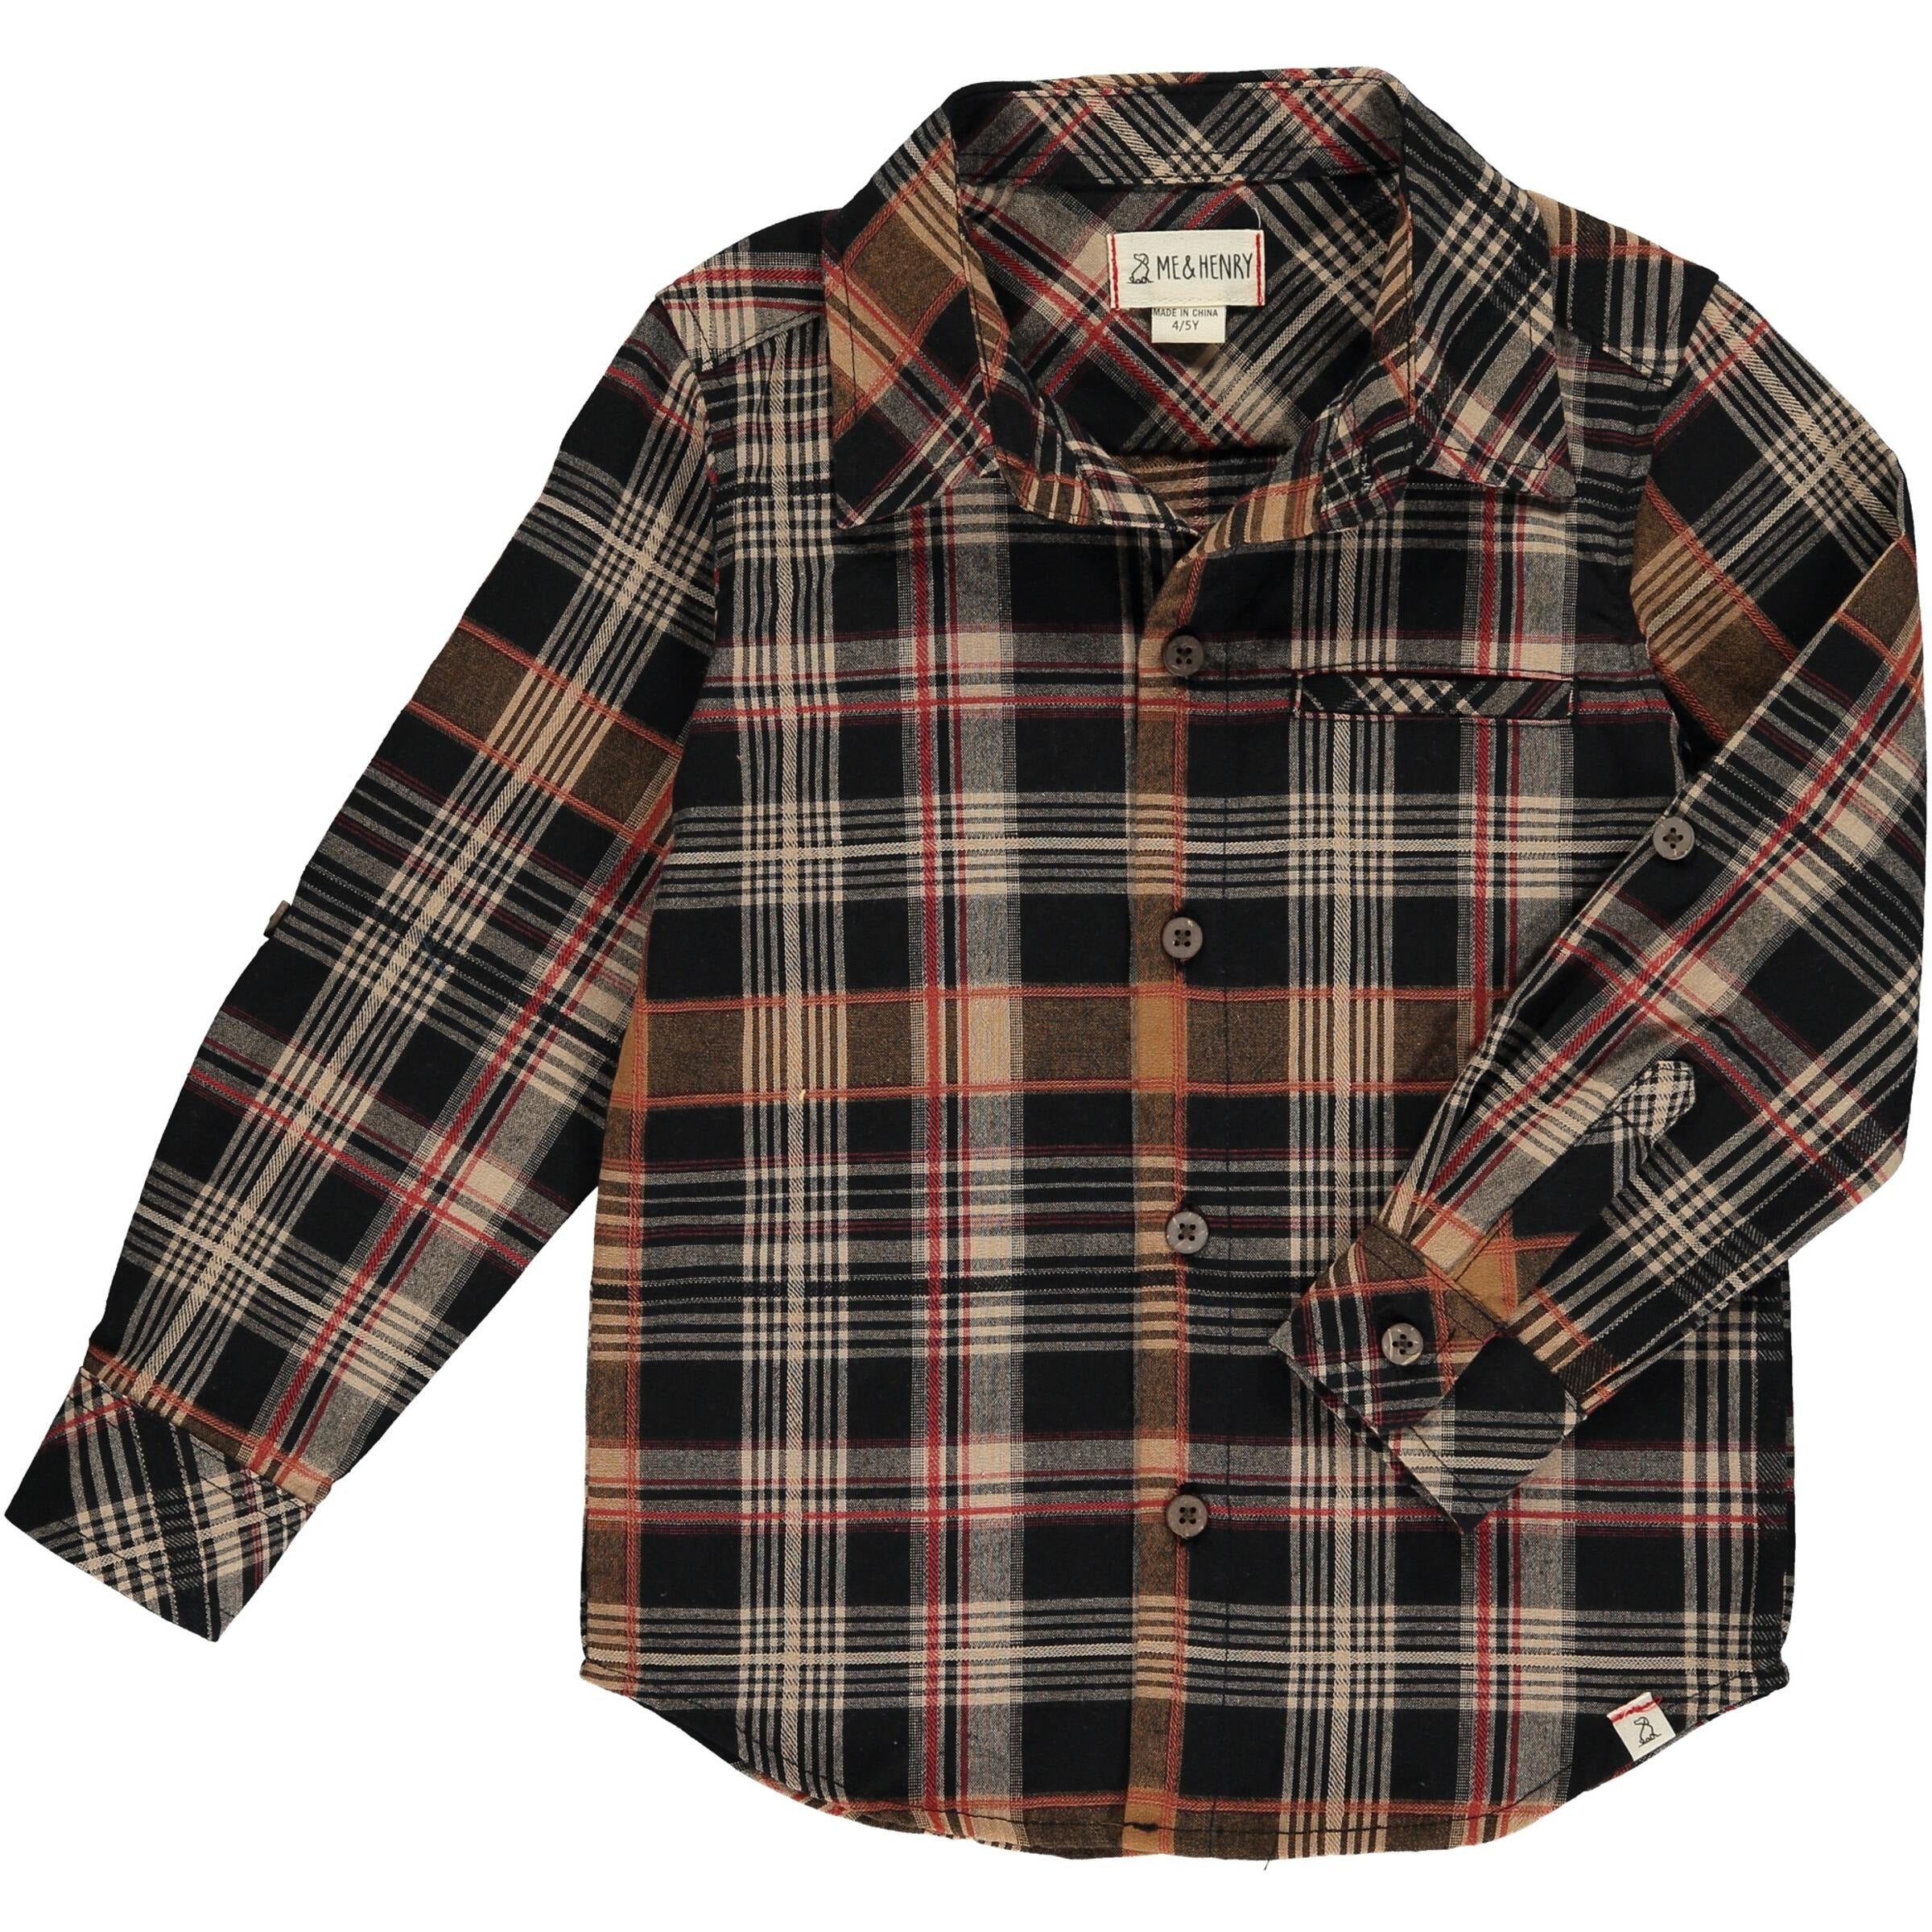 black, brown, red and cream plaid long sleeve button down